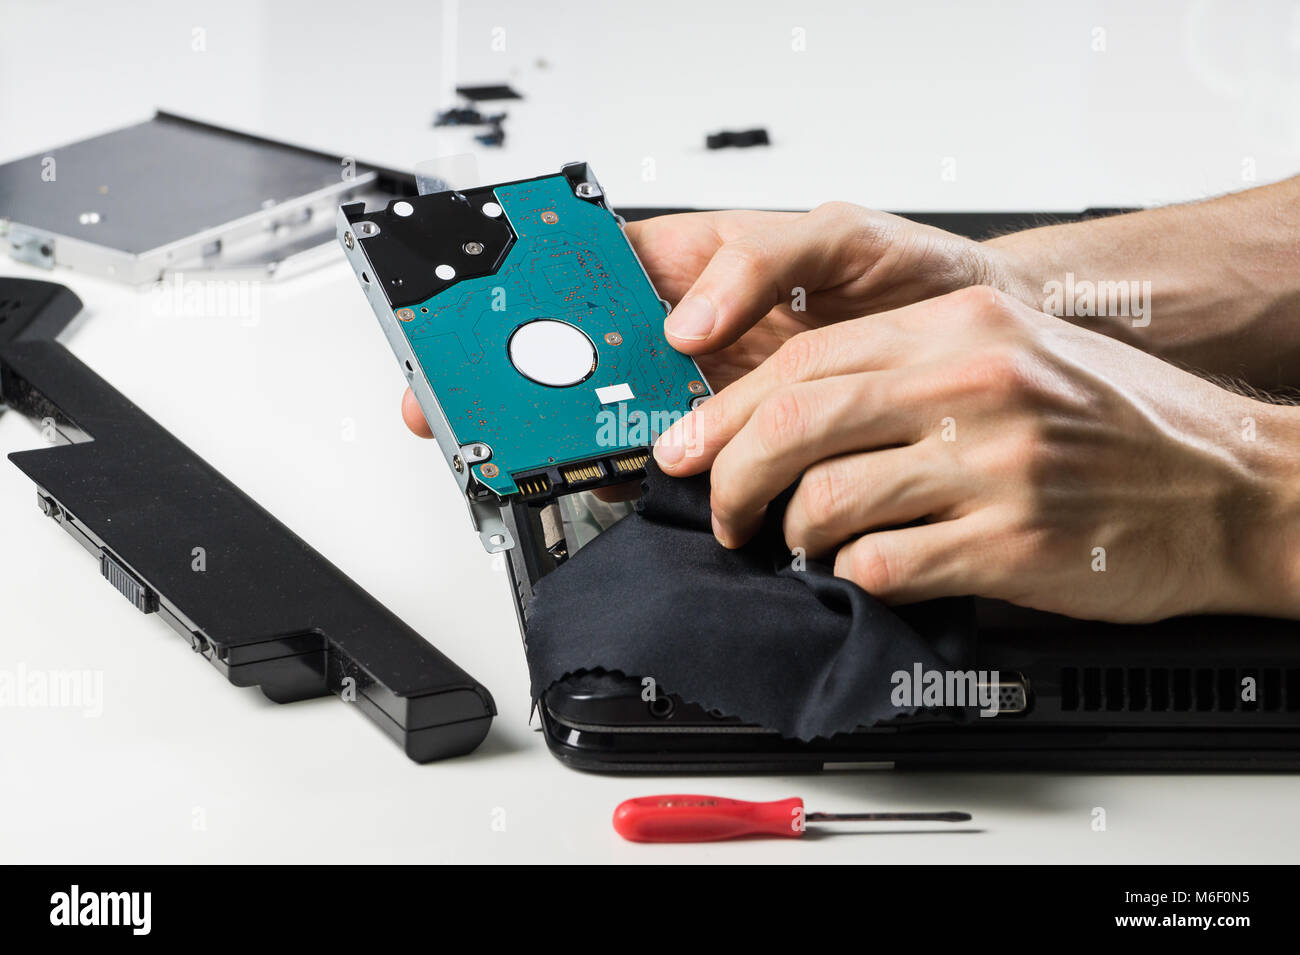 Cleaning computer hardware with cloth Stock Photo